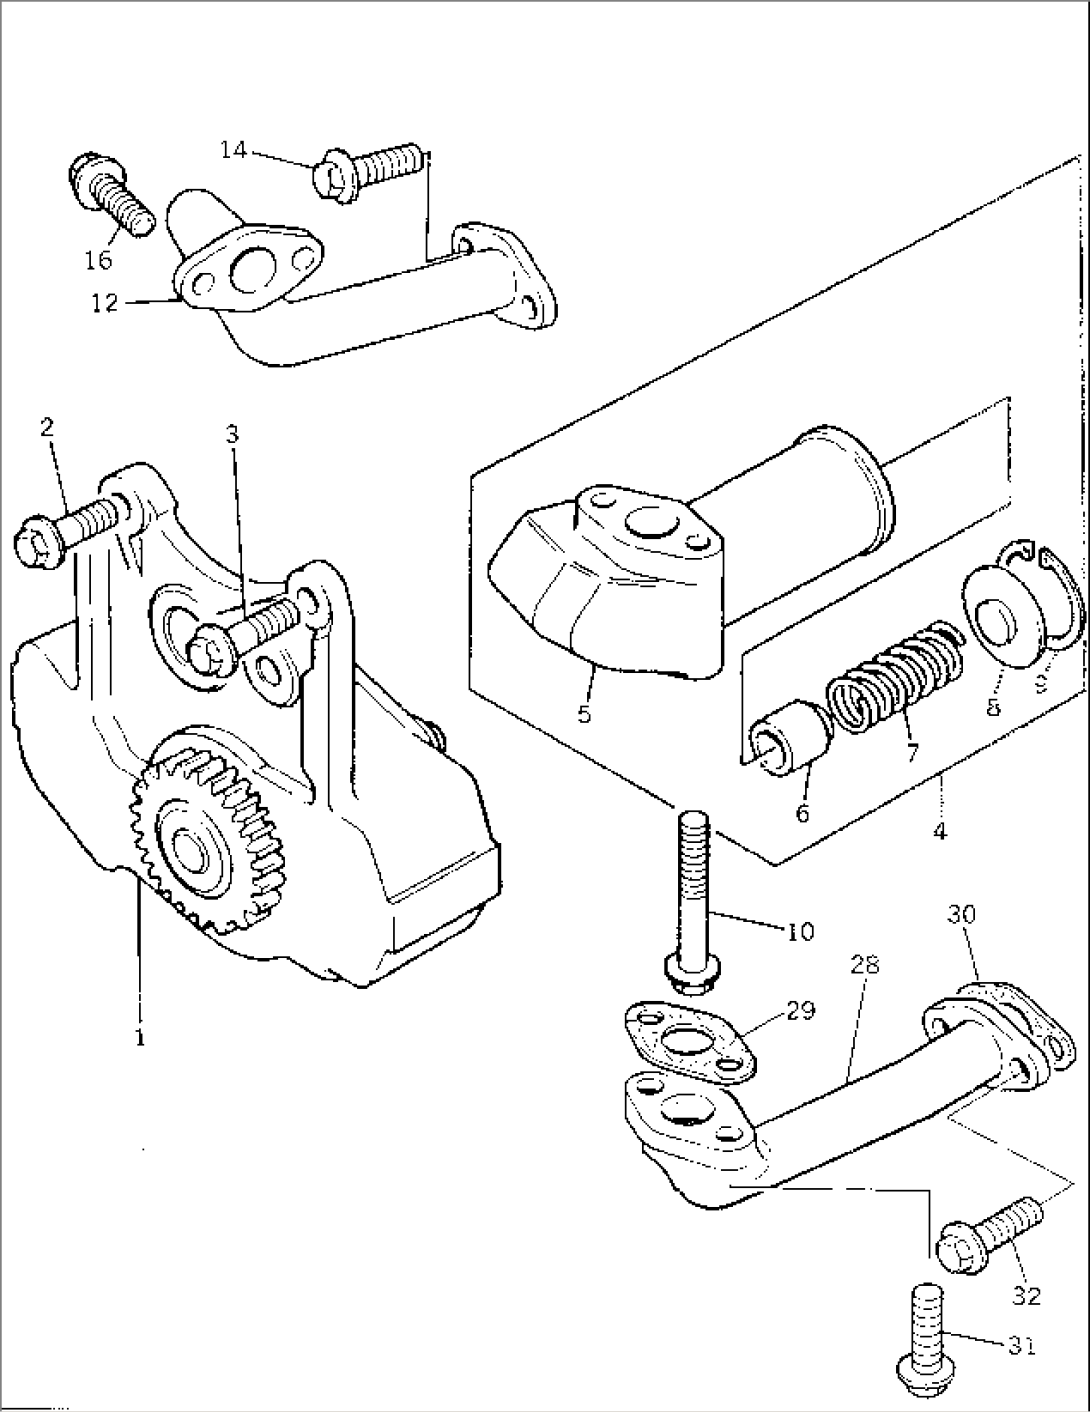 LUBRICATING OIL PUMP AND DELIVERY HOUSING(#U514645U-)